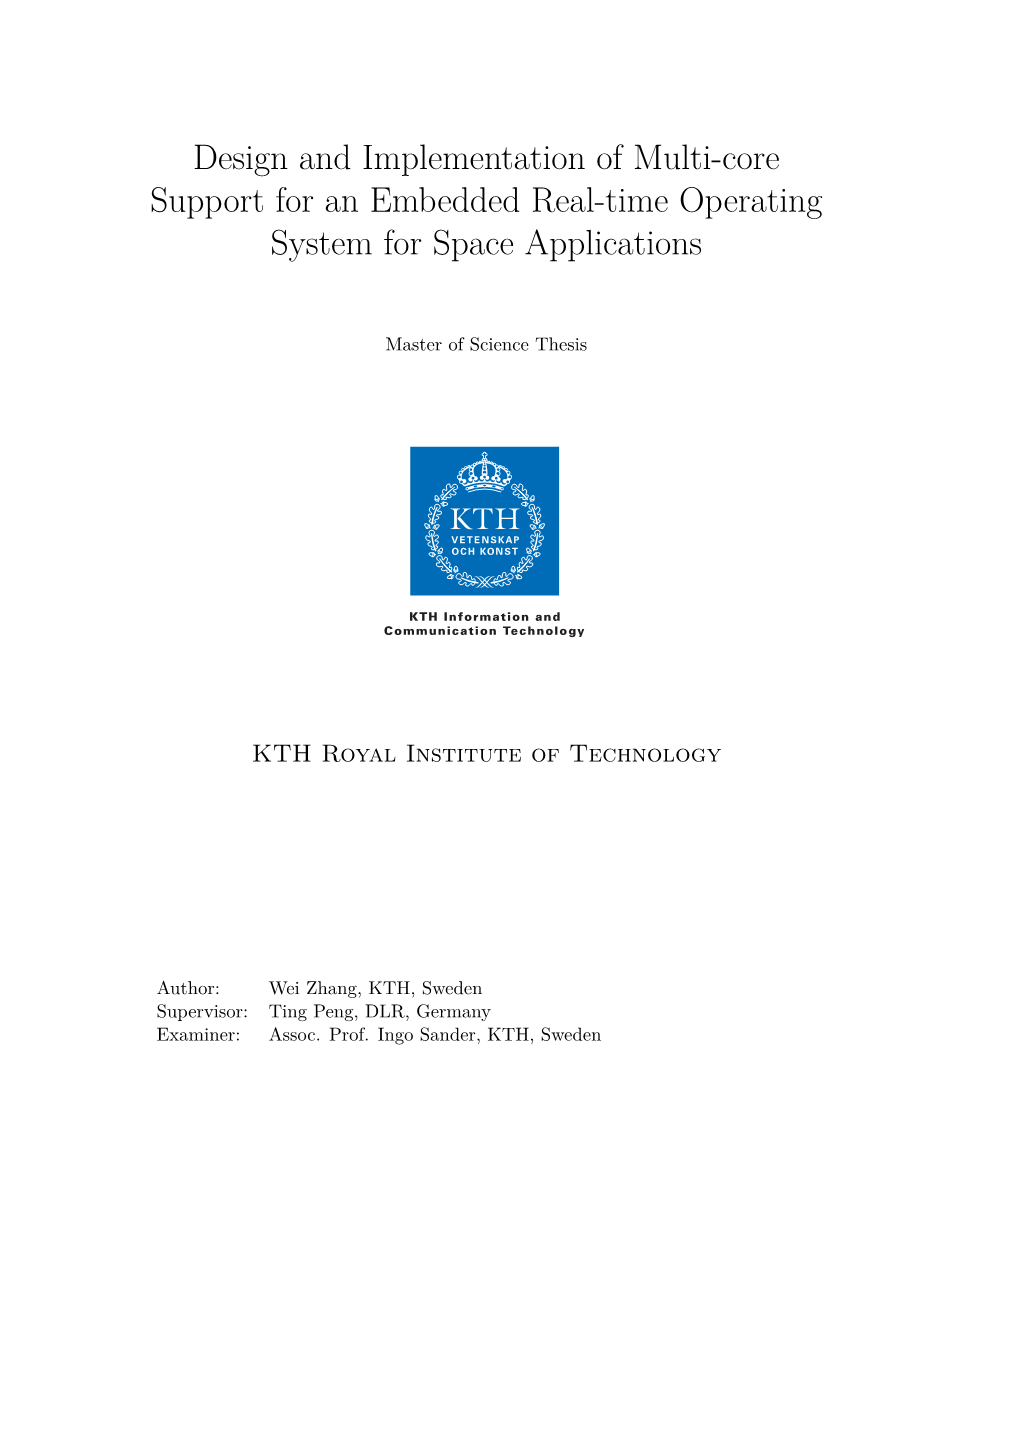 Design and Implementation of Multi-Core Support for an Embedded Real-Time Operating System for Space Applications